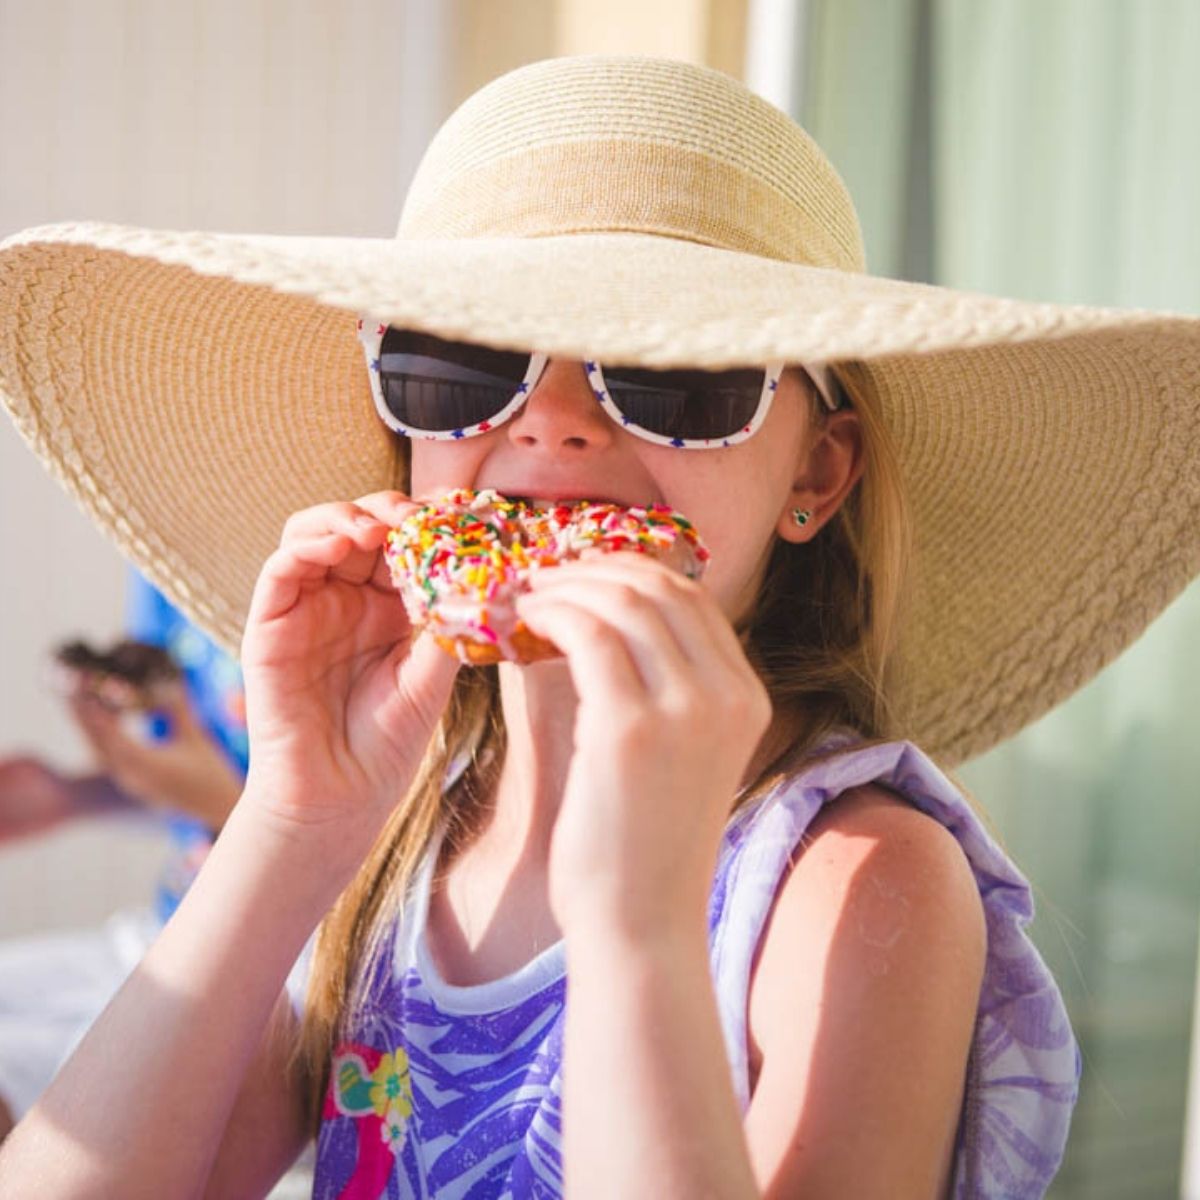 A young girl is eating a donut while wearing a sunhat and sunglasses.